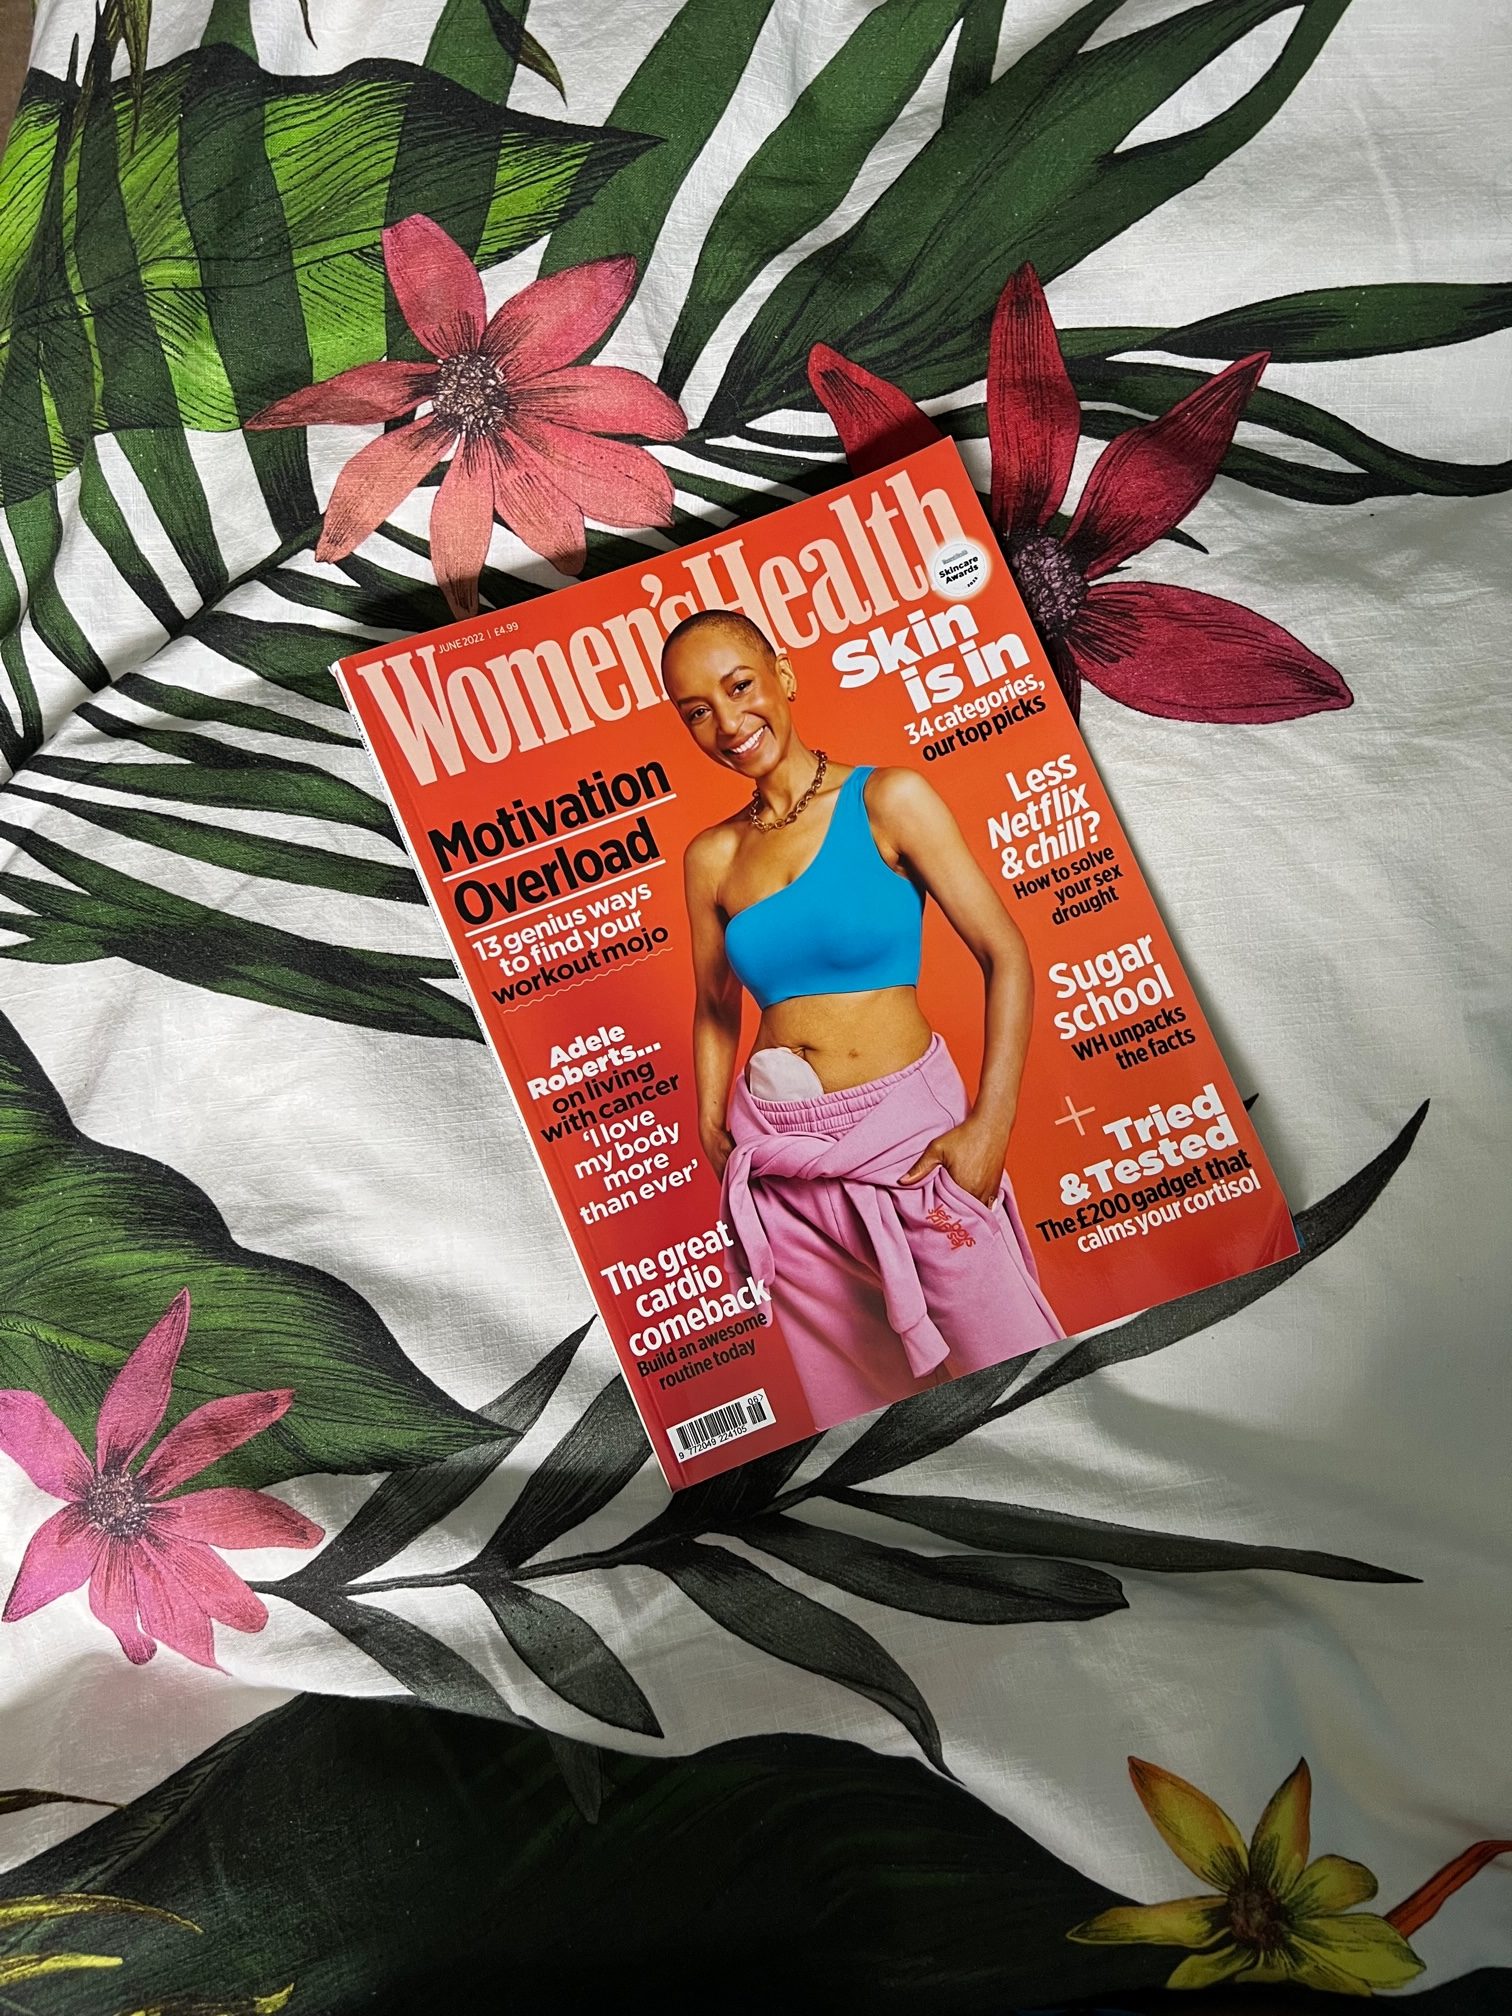 A copy of Women's Health Magazine, with Adele Roberts on the cover